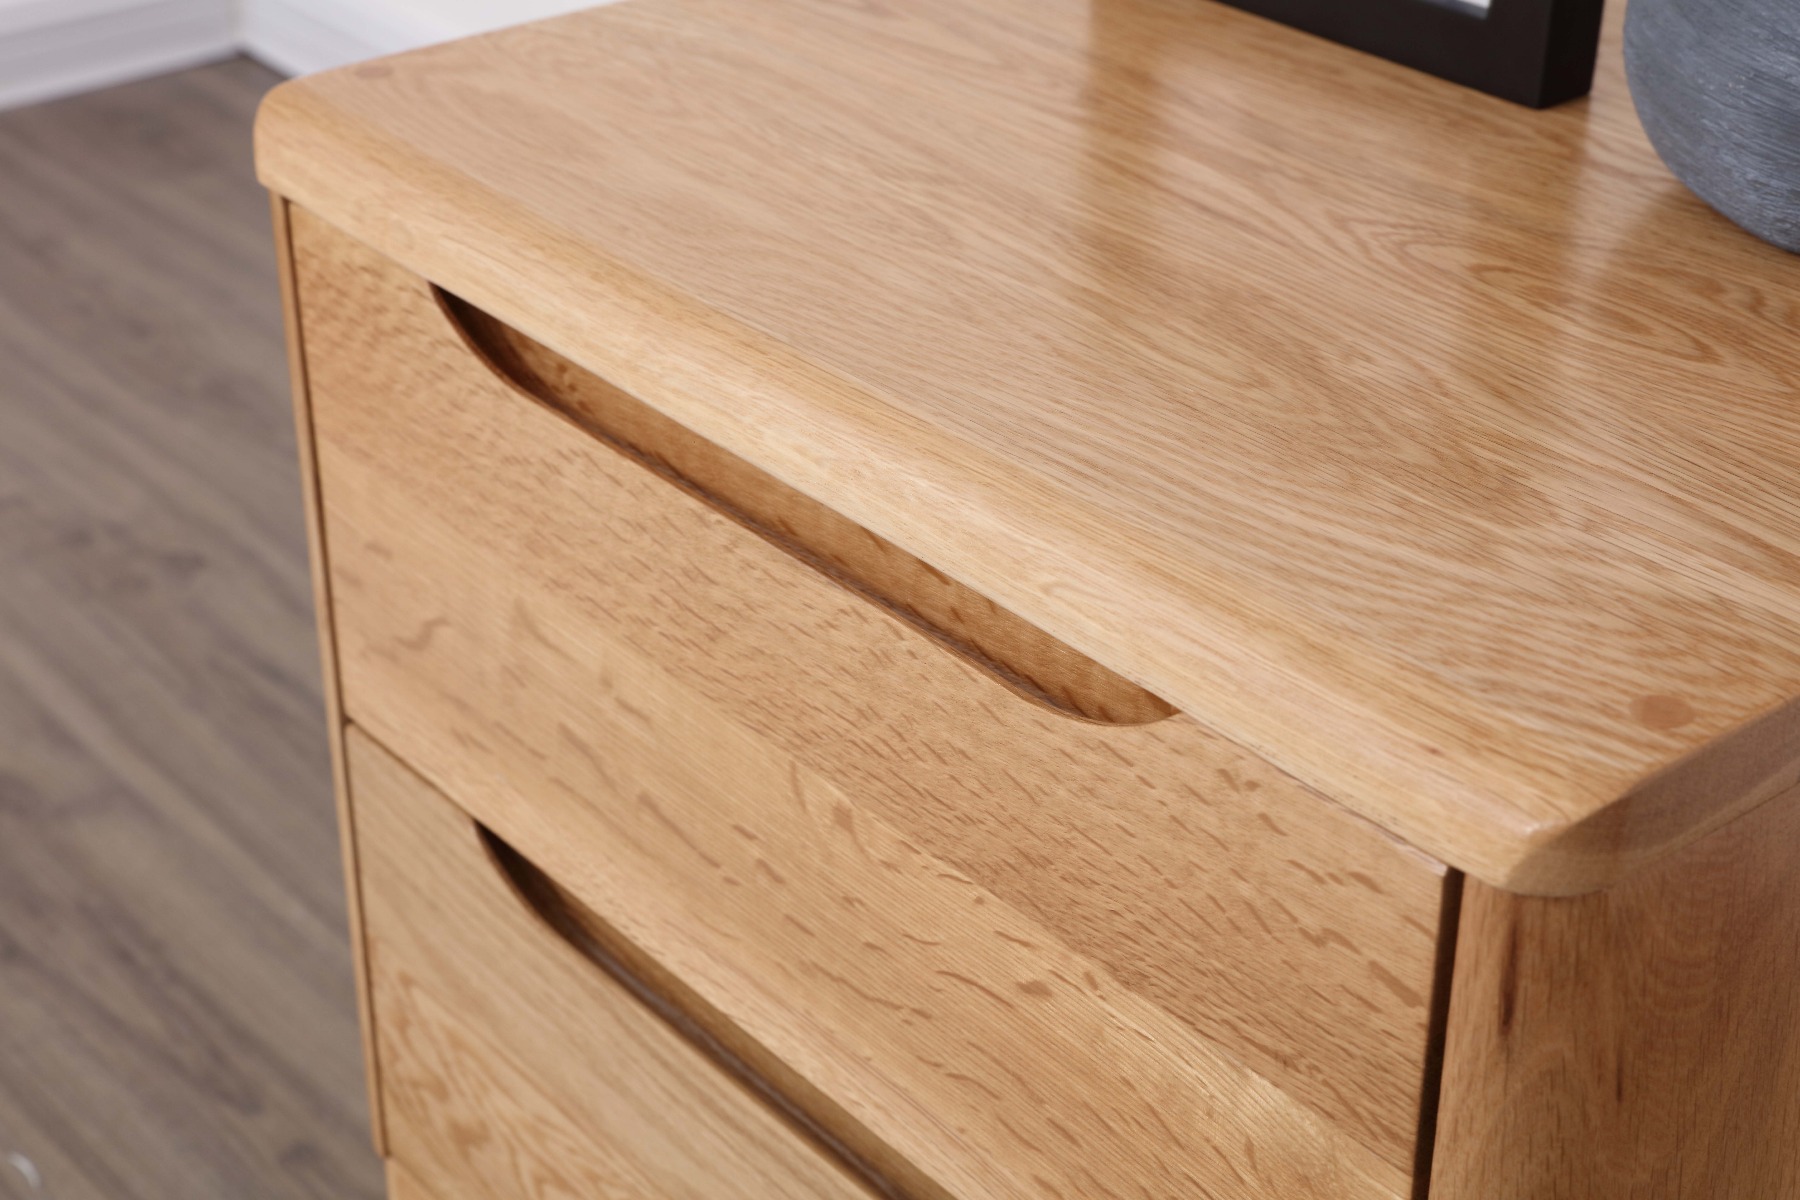 Beautiful, natural wood grains and a chamfered front edge.